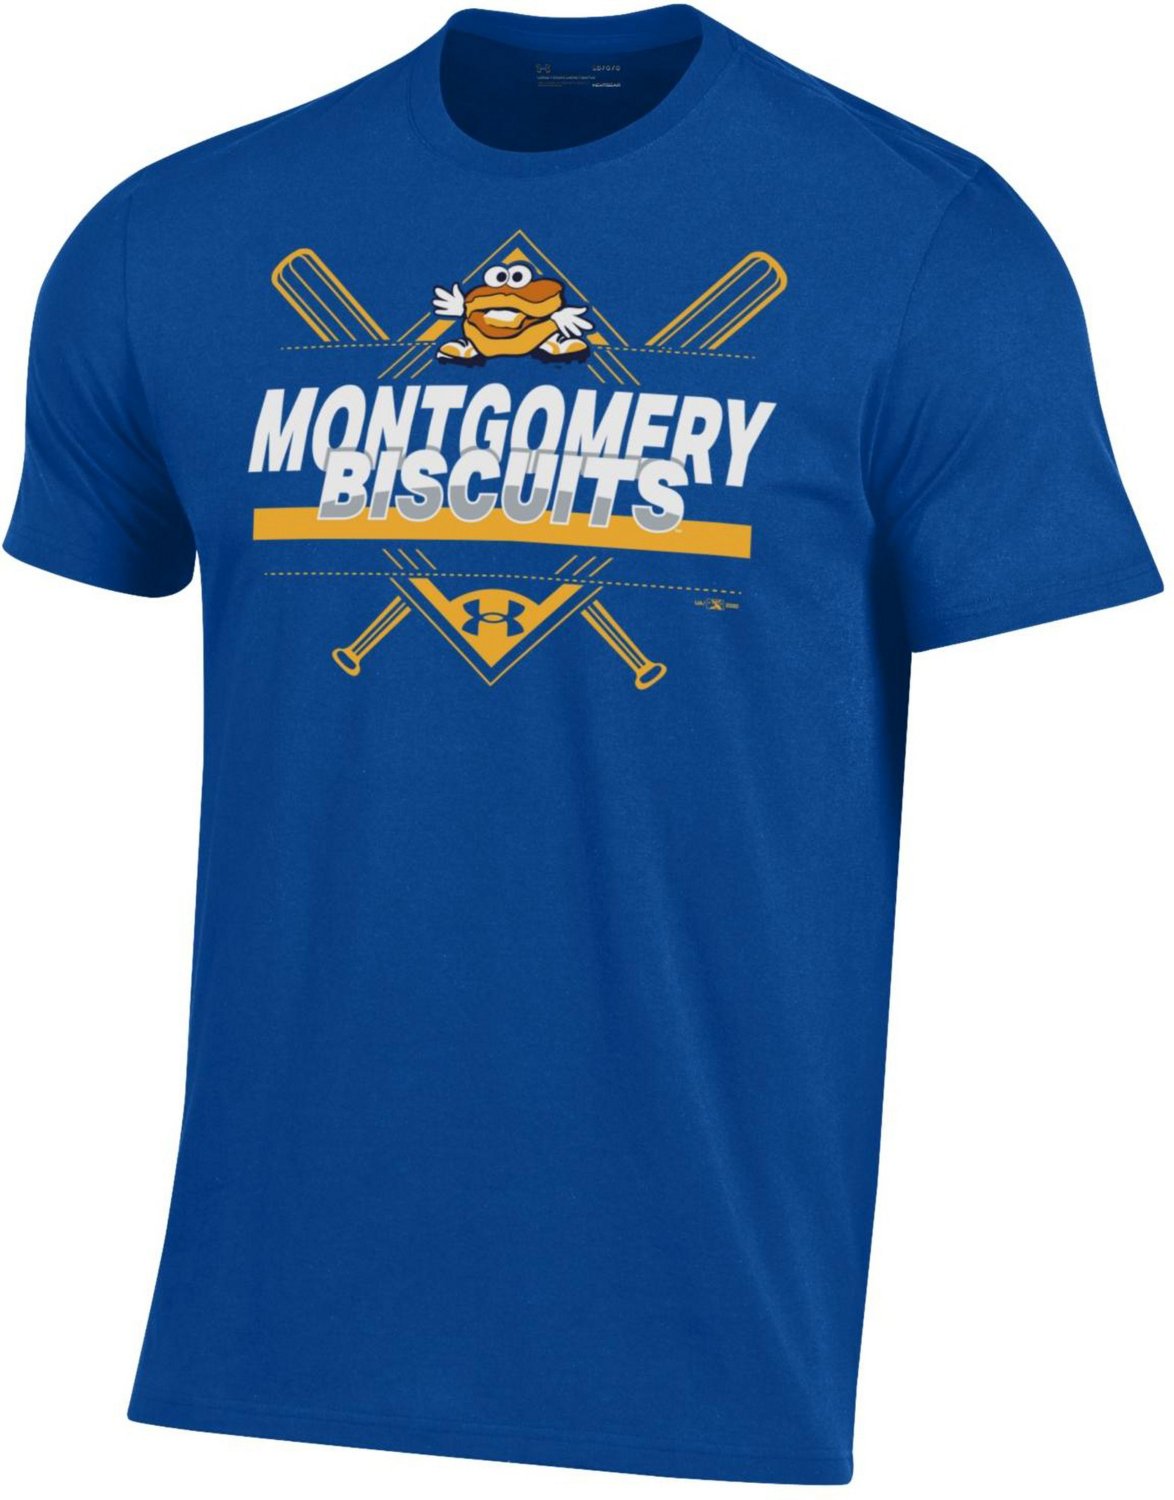 Under Armour Men's Montgomery Biscuits Performance T-shirt